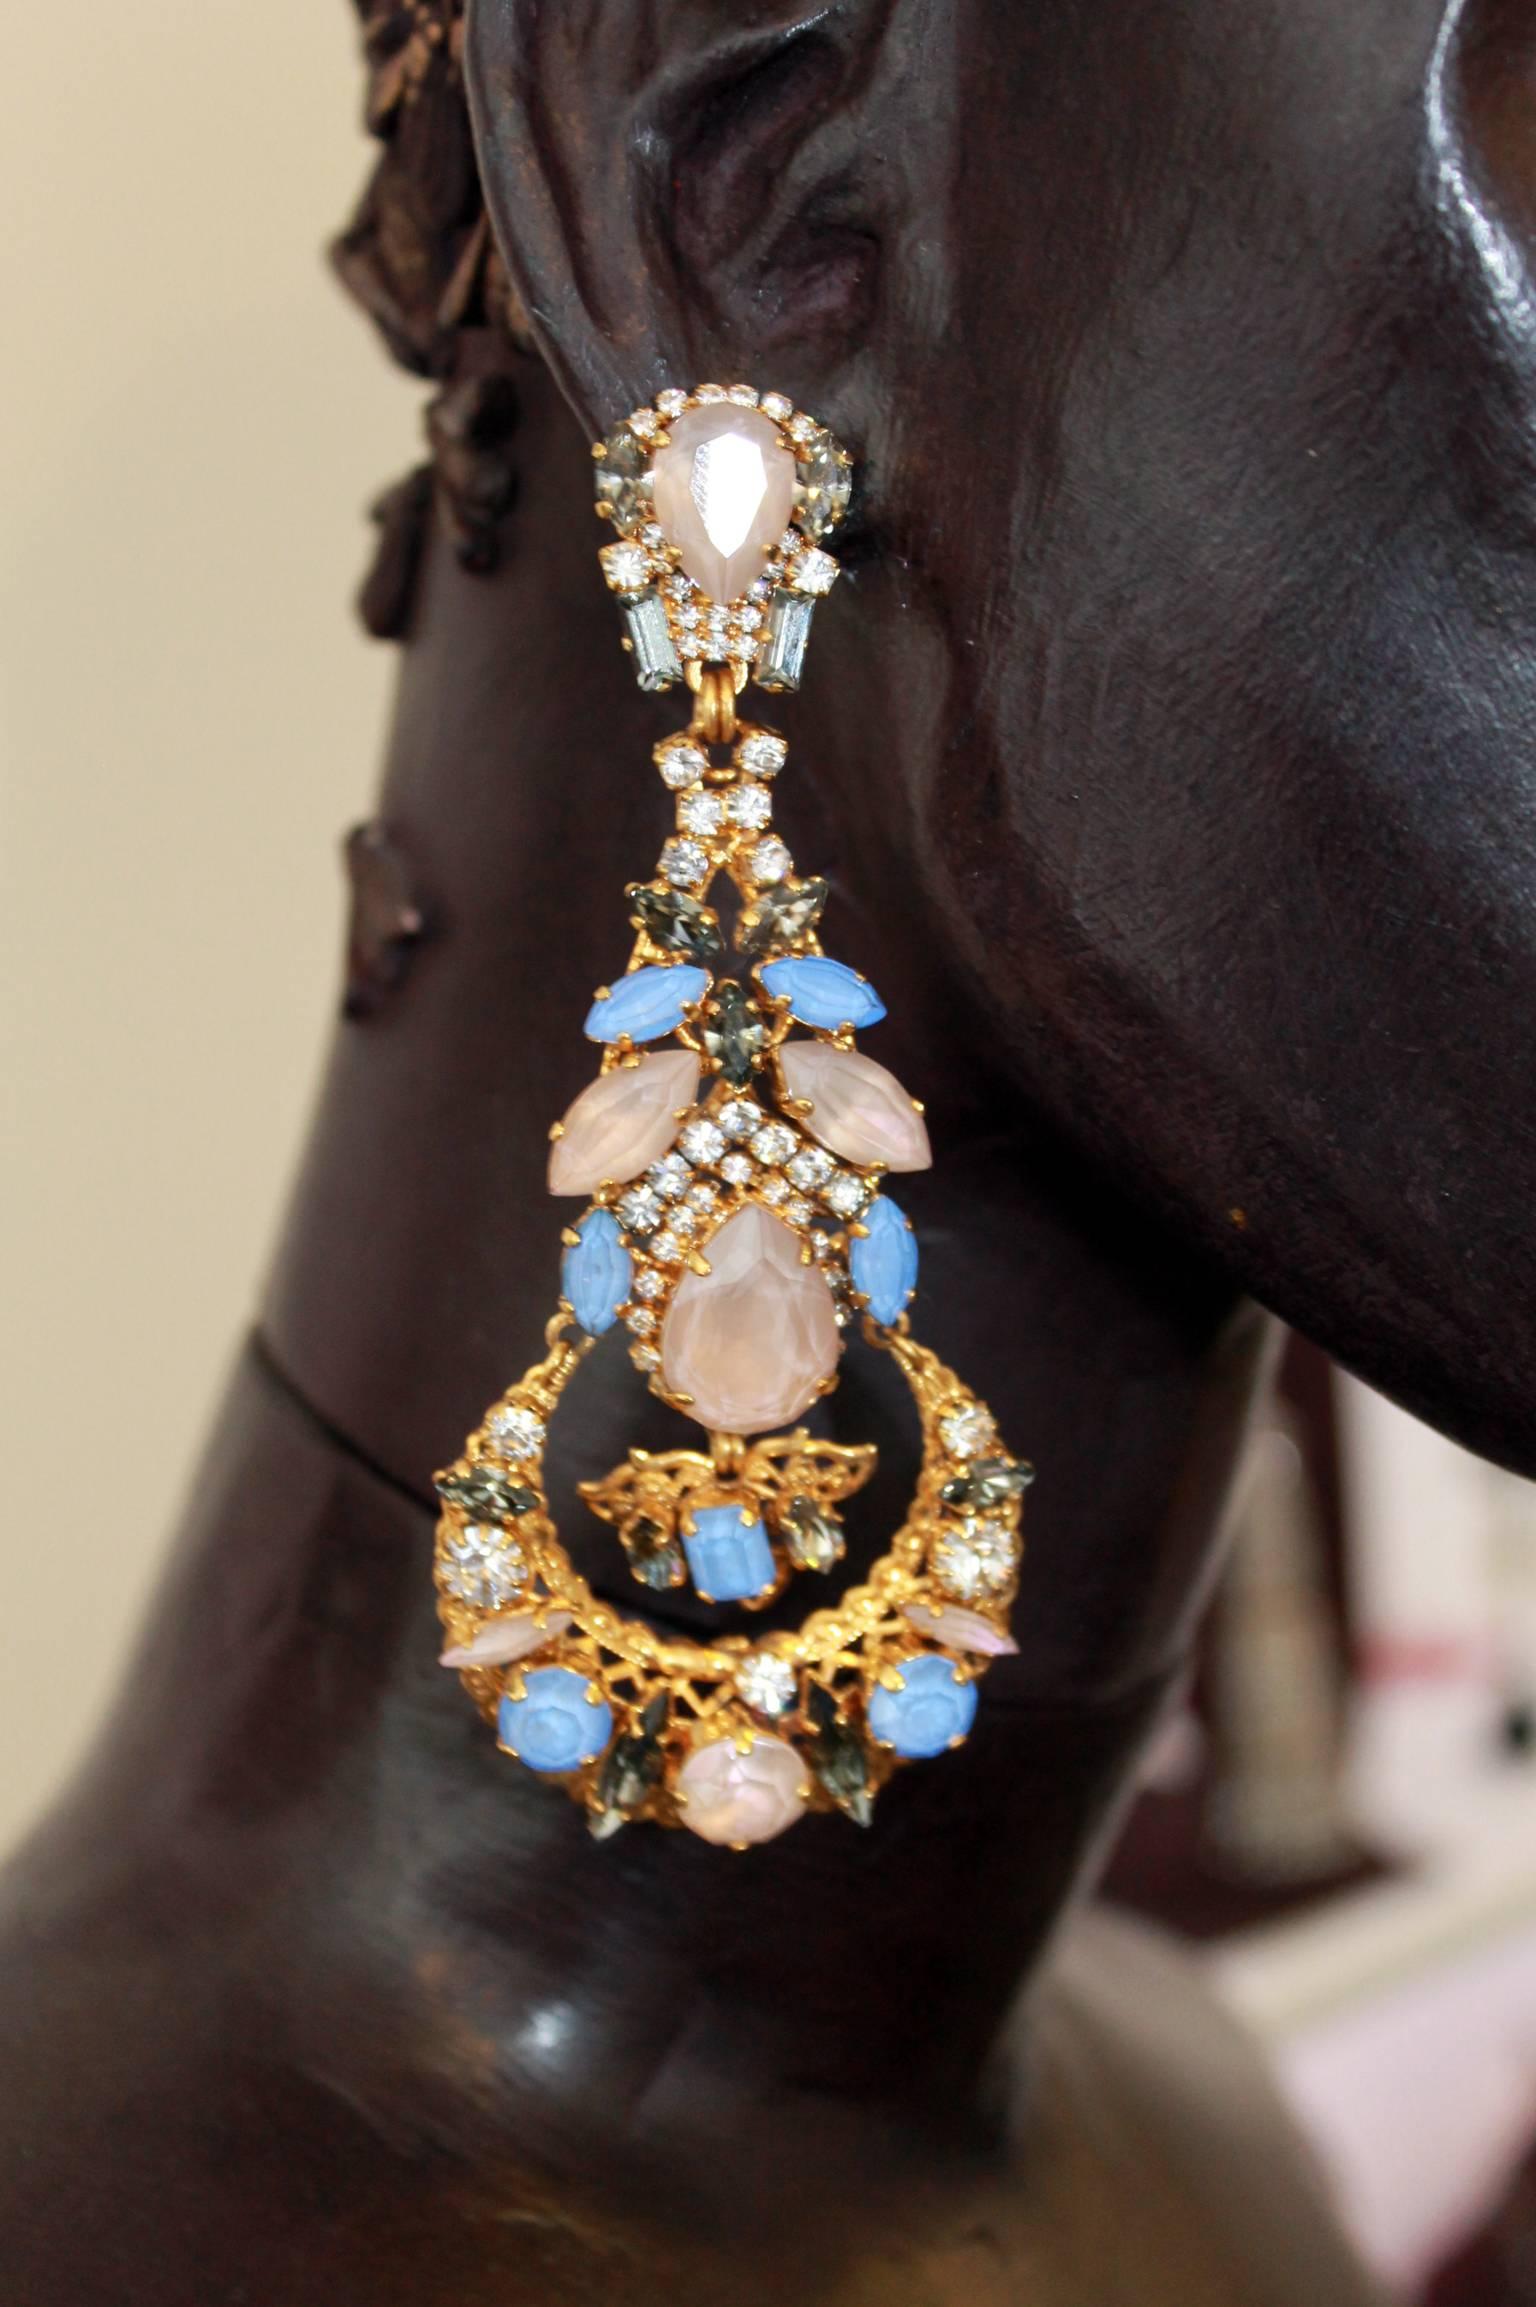 
Dazzling chandelier earrings created using only the finest light-catching Swarovski crystals in ultra-feminine tones of forget-me-not blue and nude. These stunning, elaborate earrings are finished in a subtle 'antiqued' gold-plate detail to